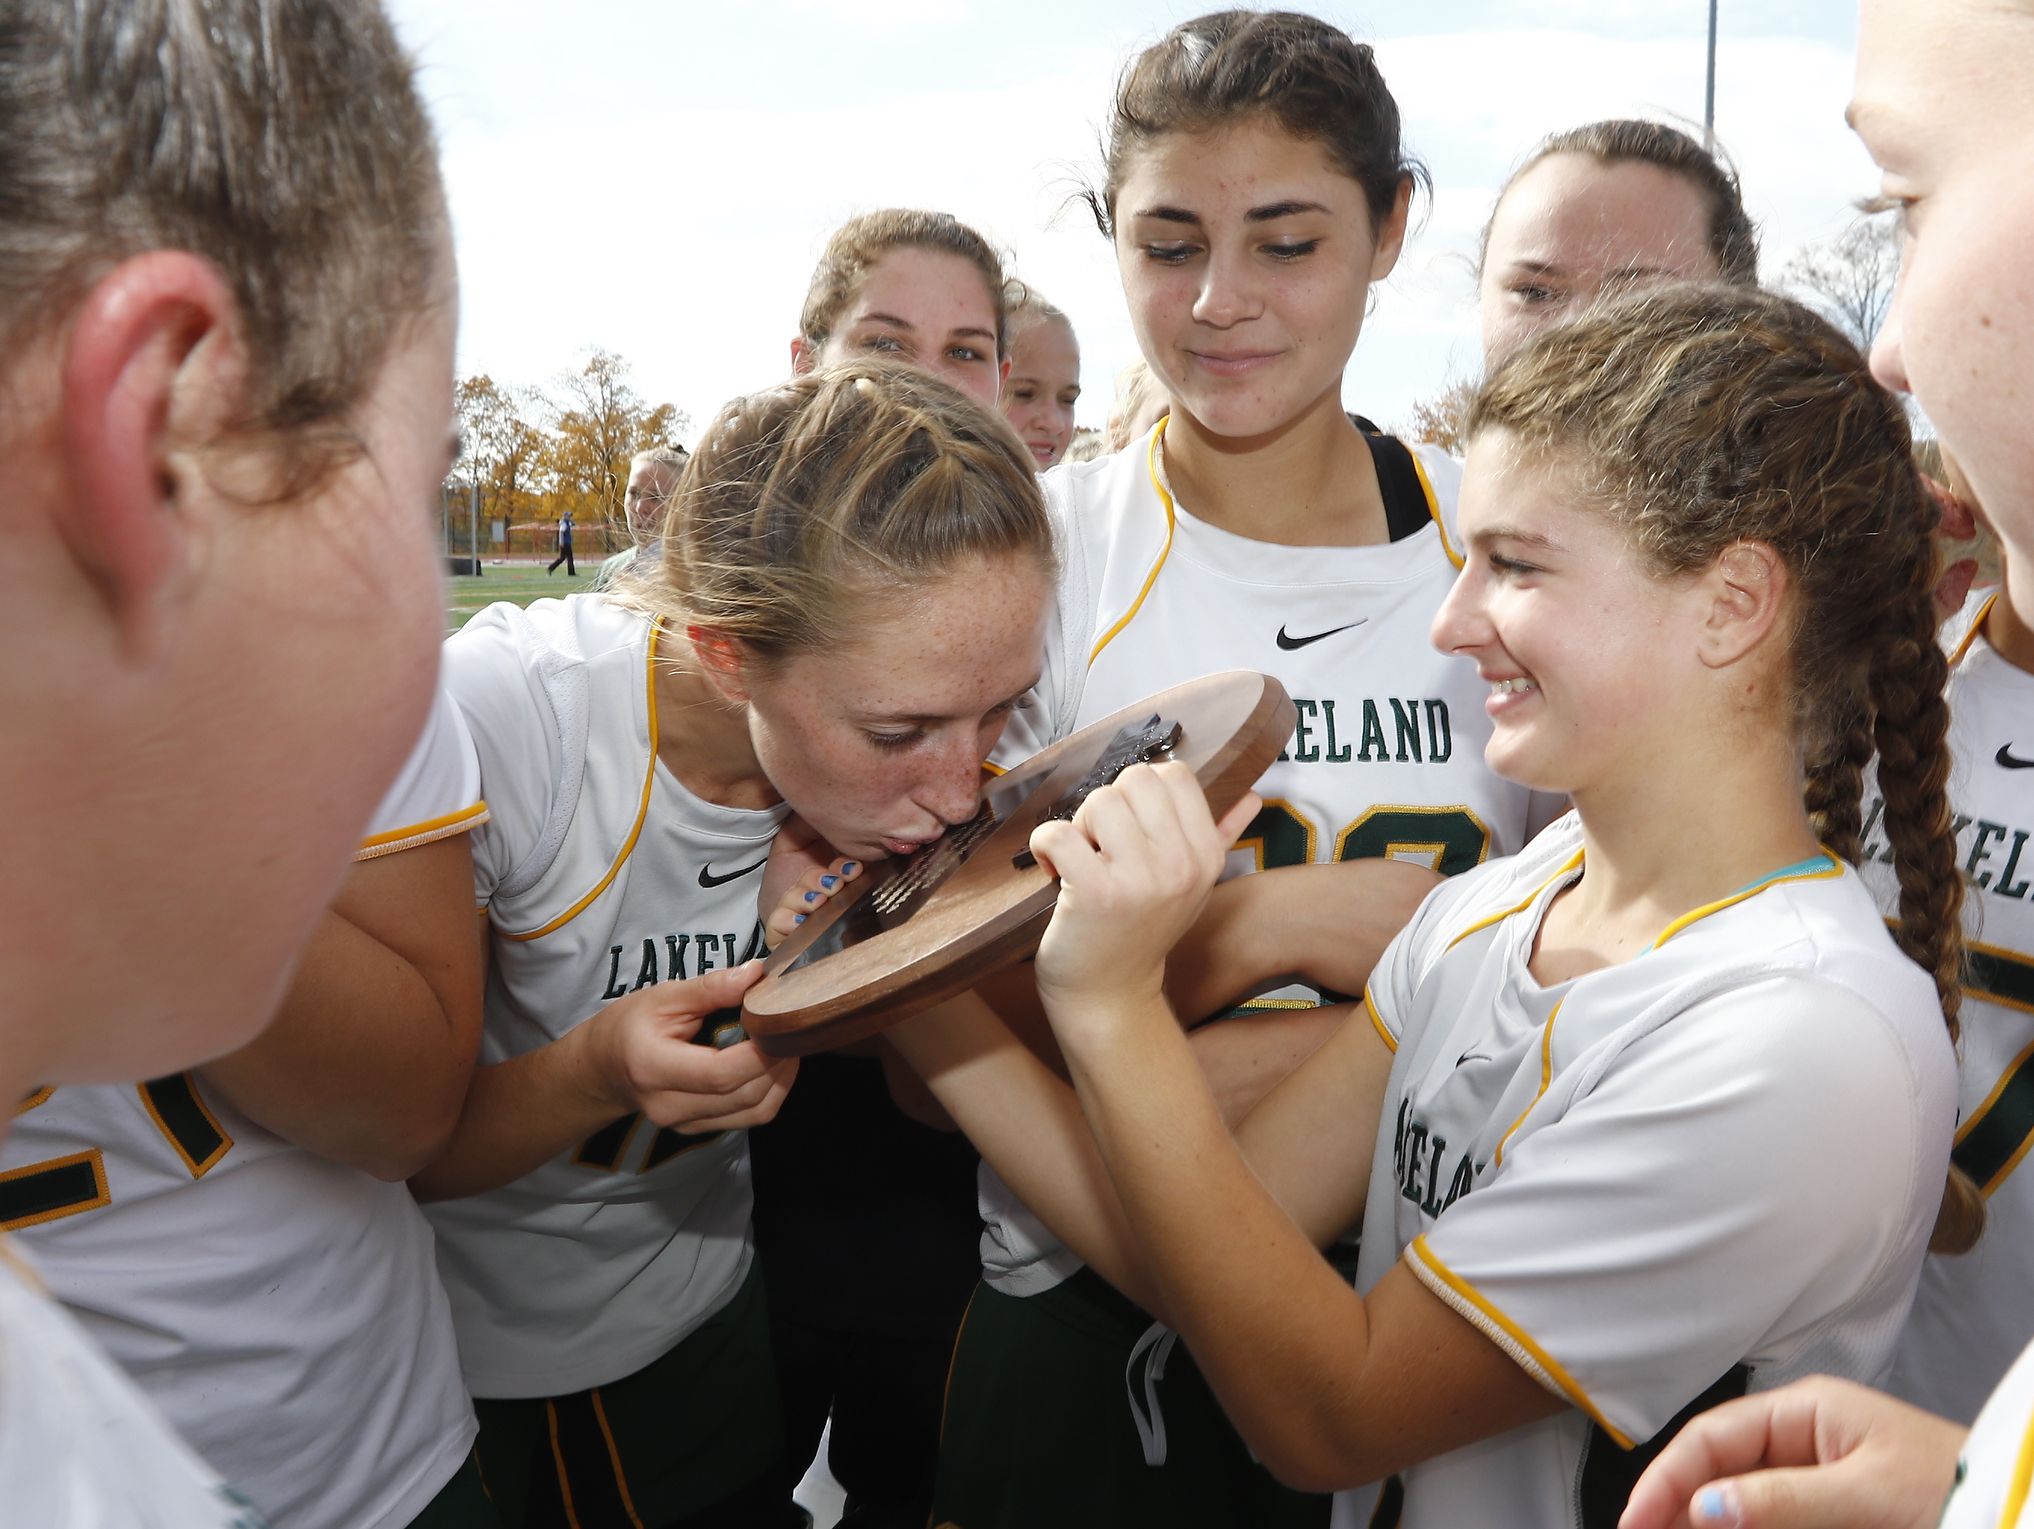 Lakeland celebrates their 8-0 win over Red Hook in the Class B regional championship field hockey game at Valhalla High School on Saturday, November 5, 2016.